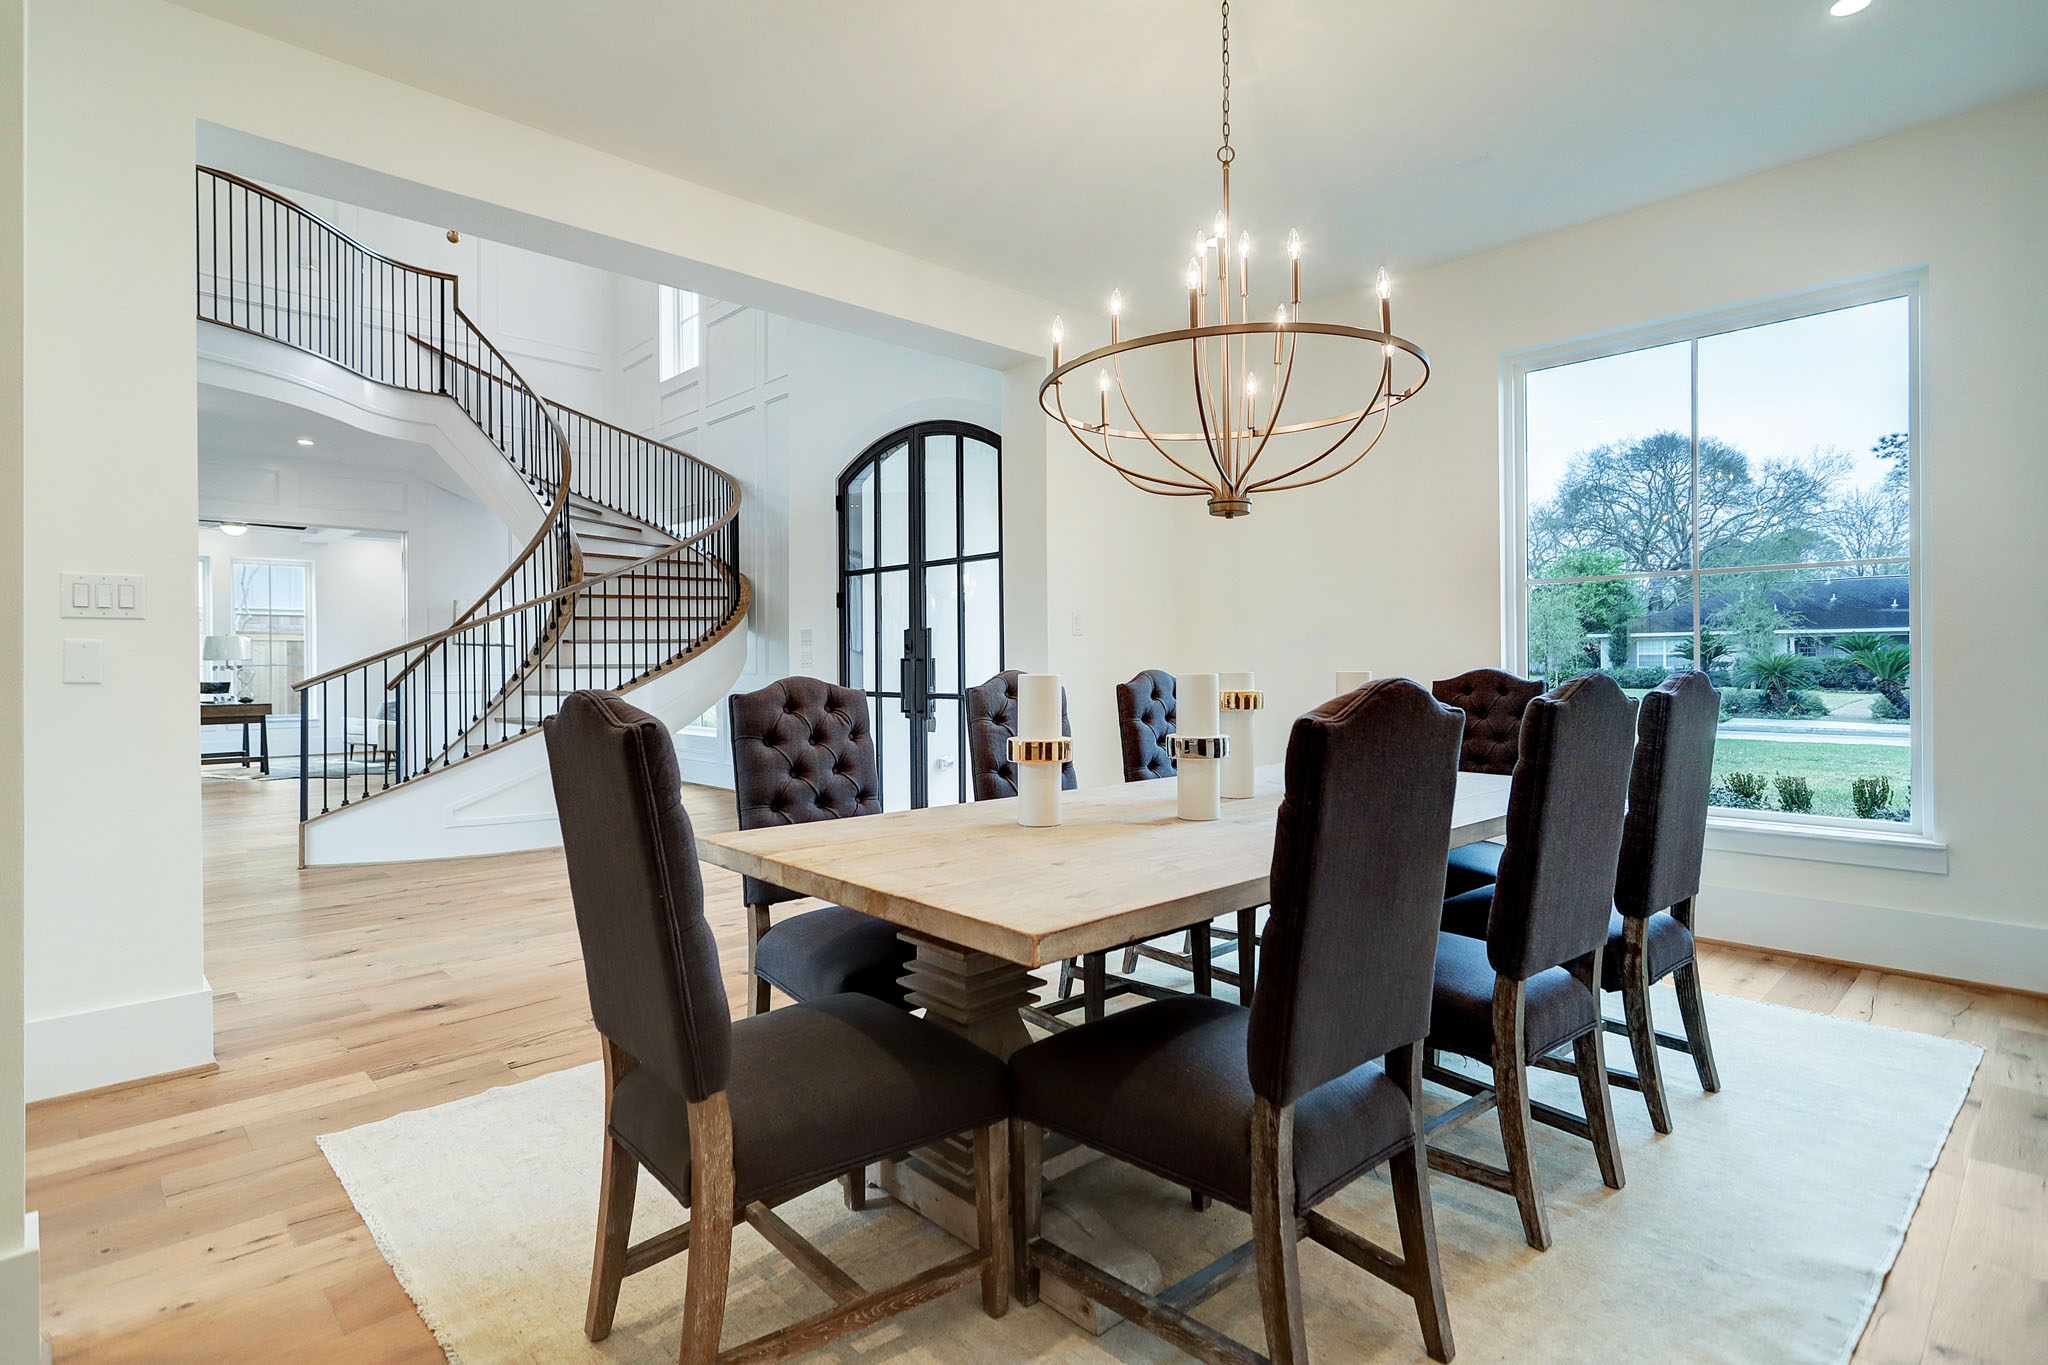  Dining Rooms Image